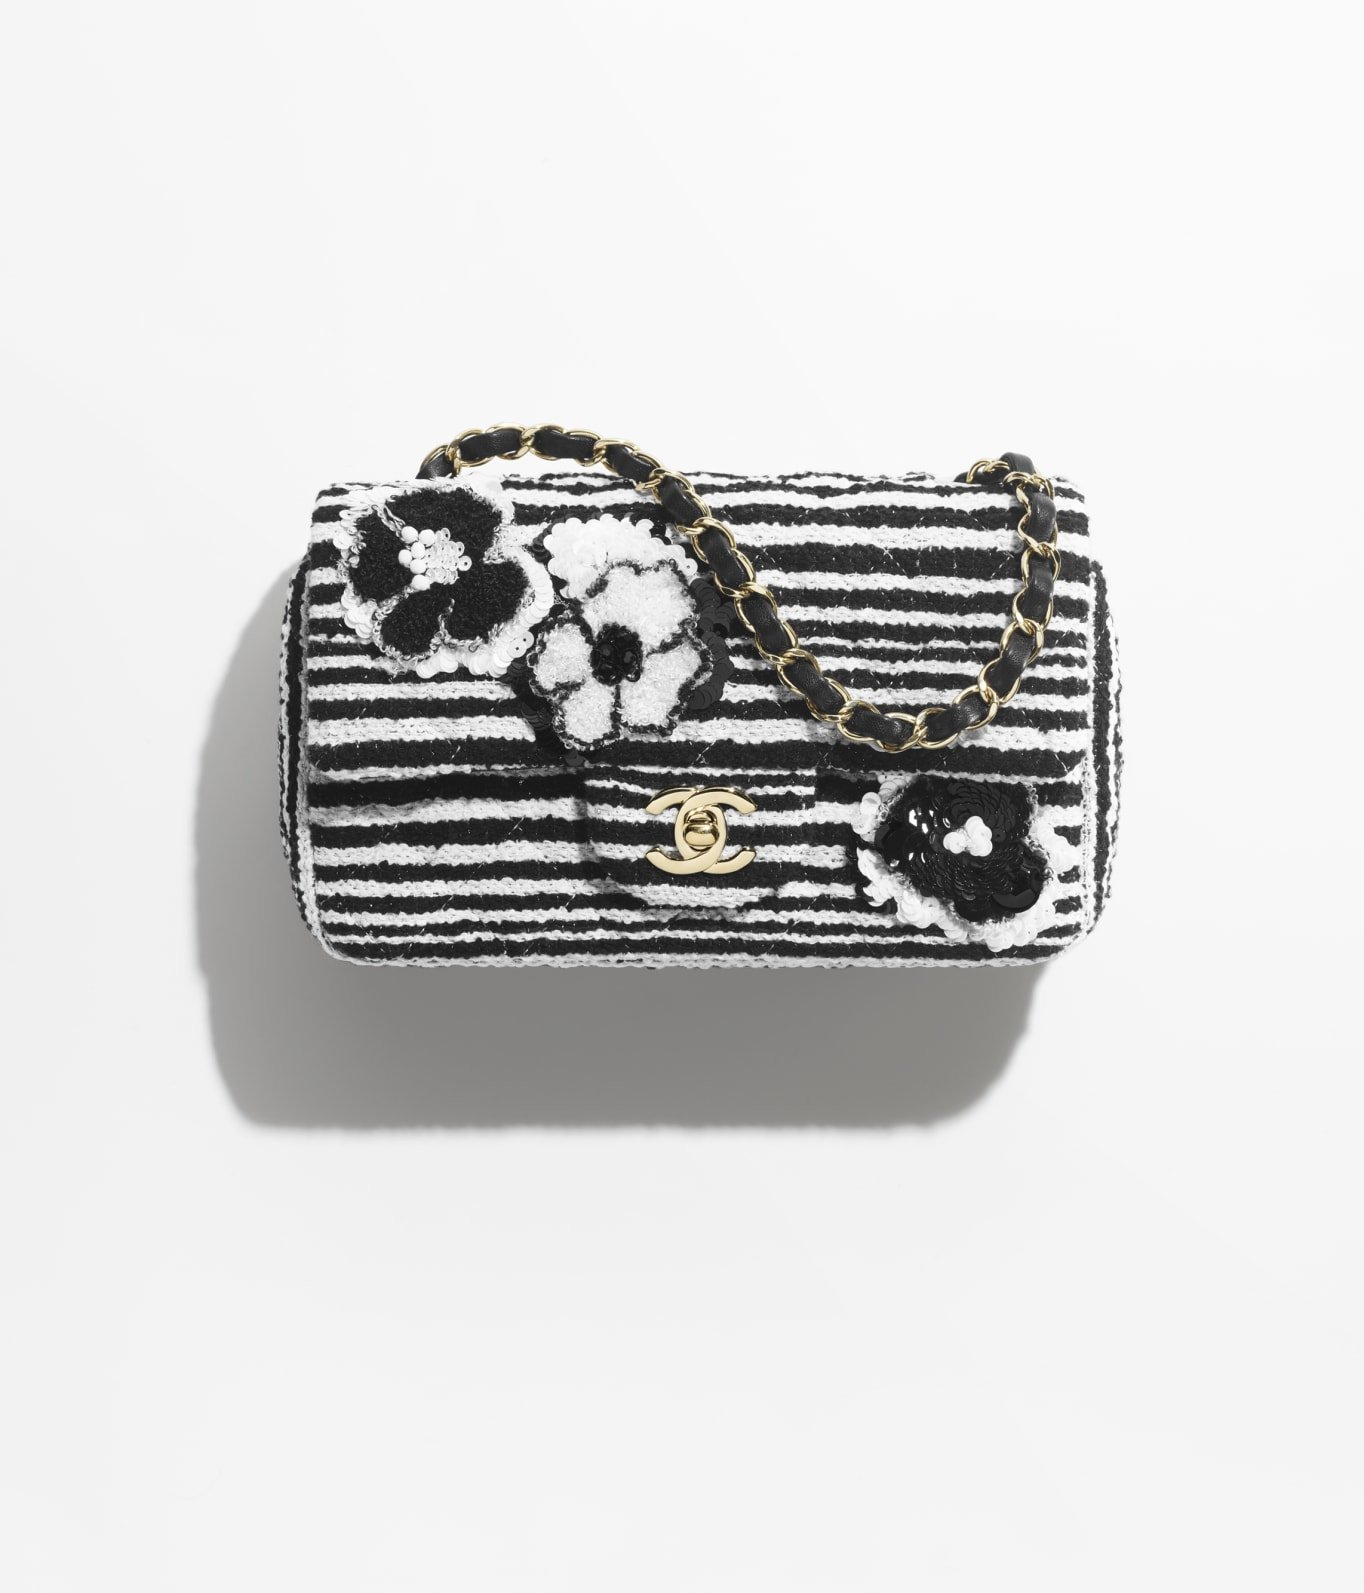 mini-classic-handbag-black-white-embroidered-cotton-tweed-sequins-gold-tone-metal-embroidered-cotton-tweed-sequins-gold-tone-metal-packshot-artistique-vue1-a69900b16711ny285-9539462856734.jpg